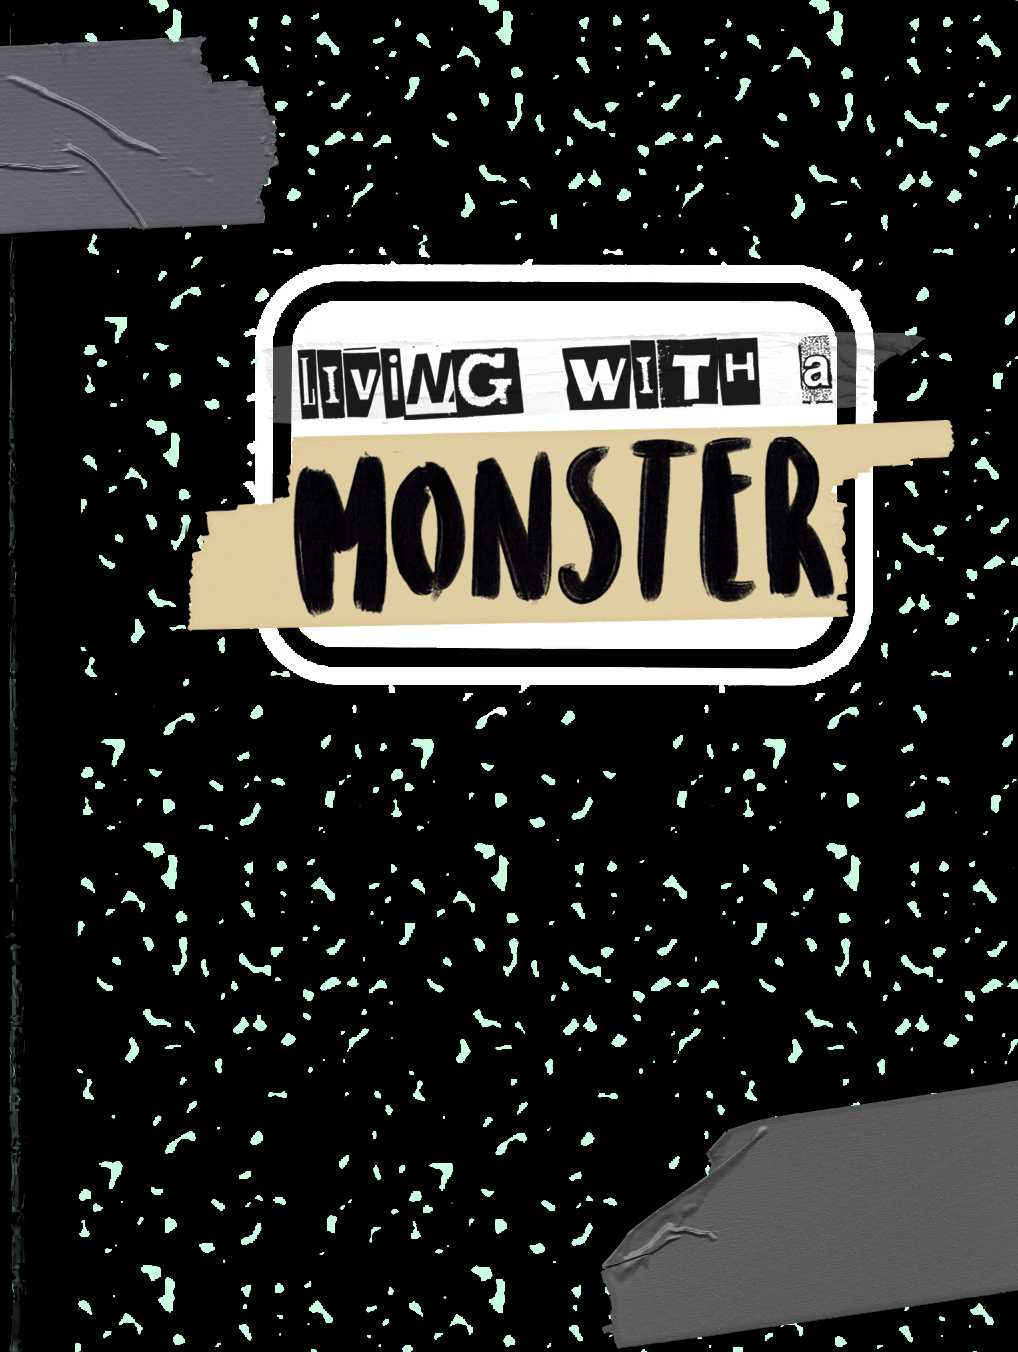 LIVING WITH A MONSTER | CIVER